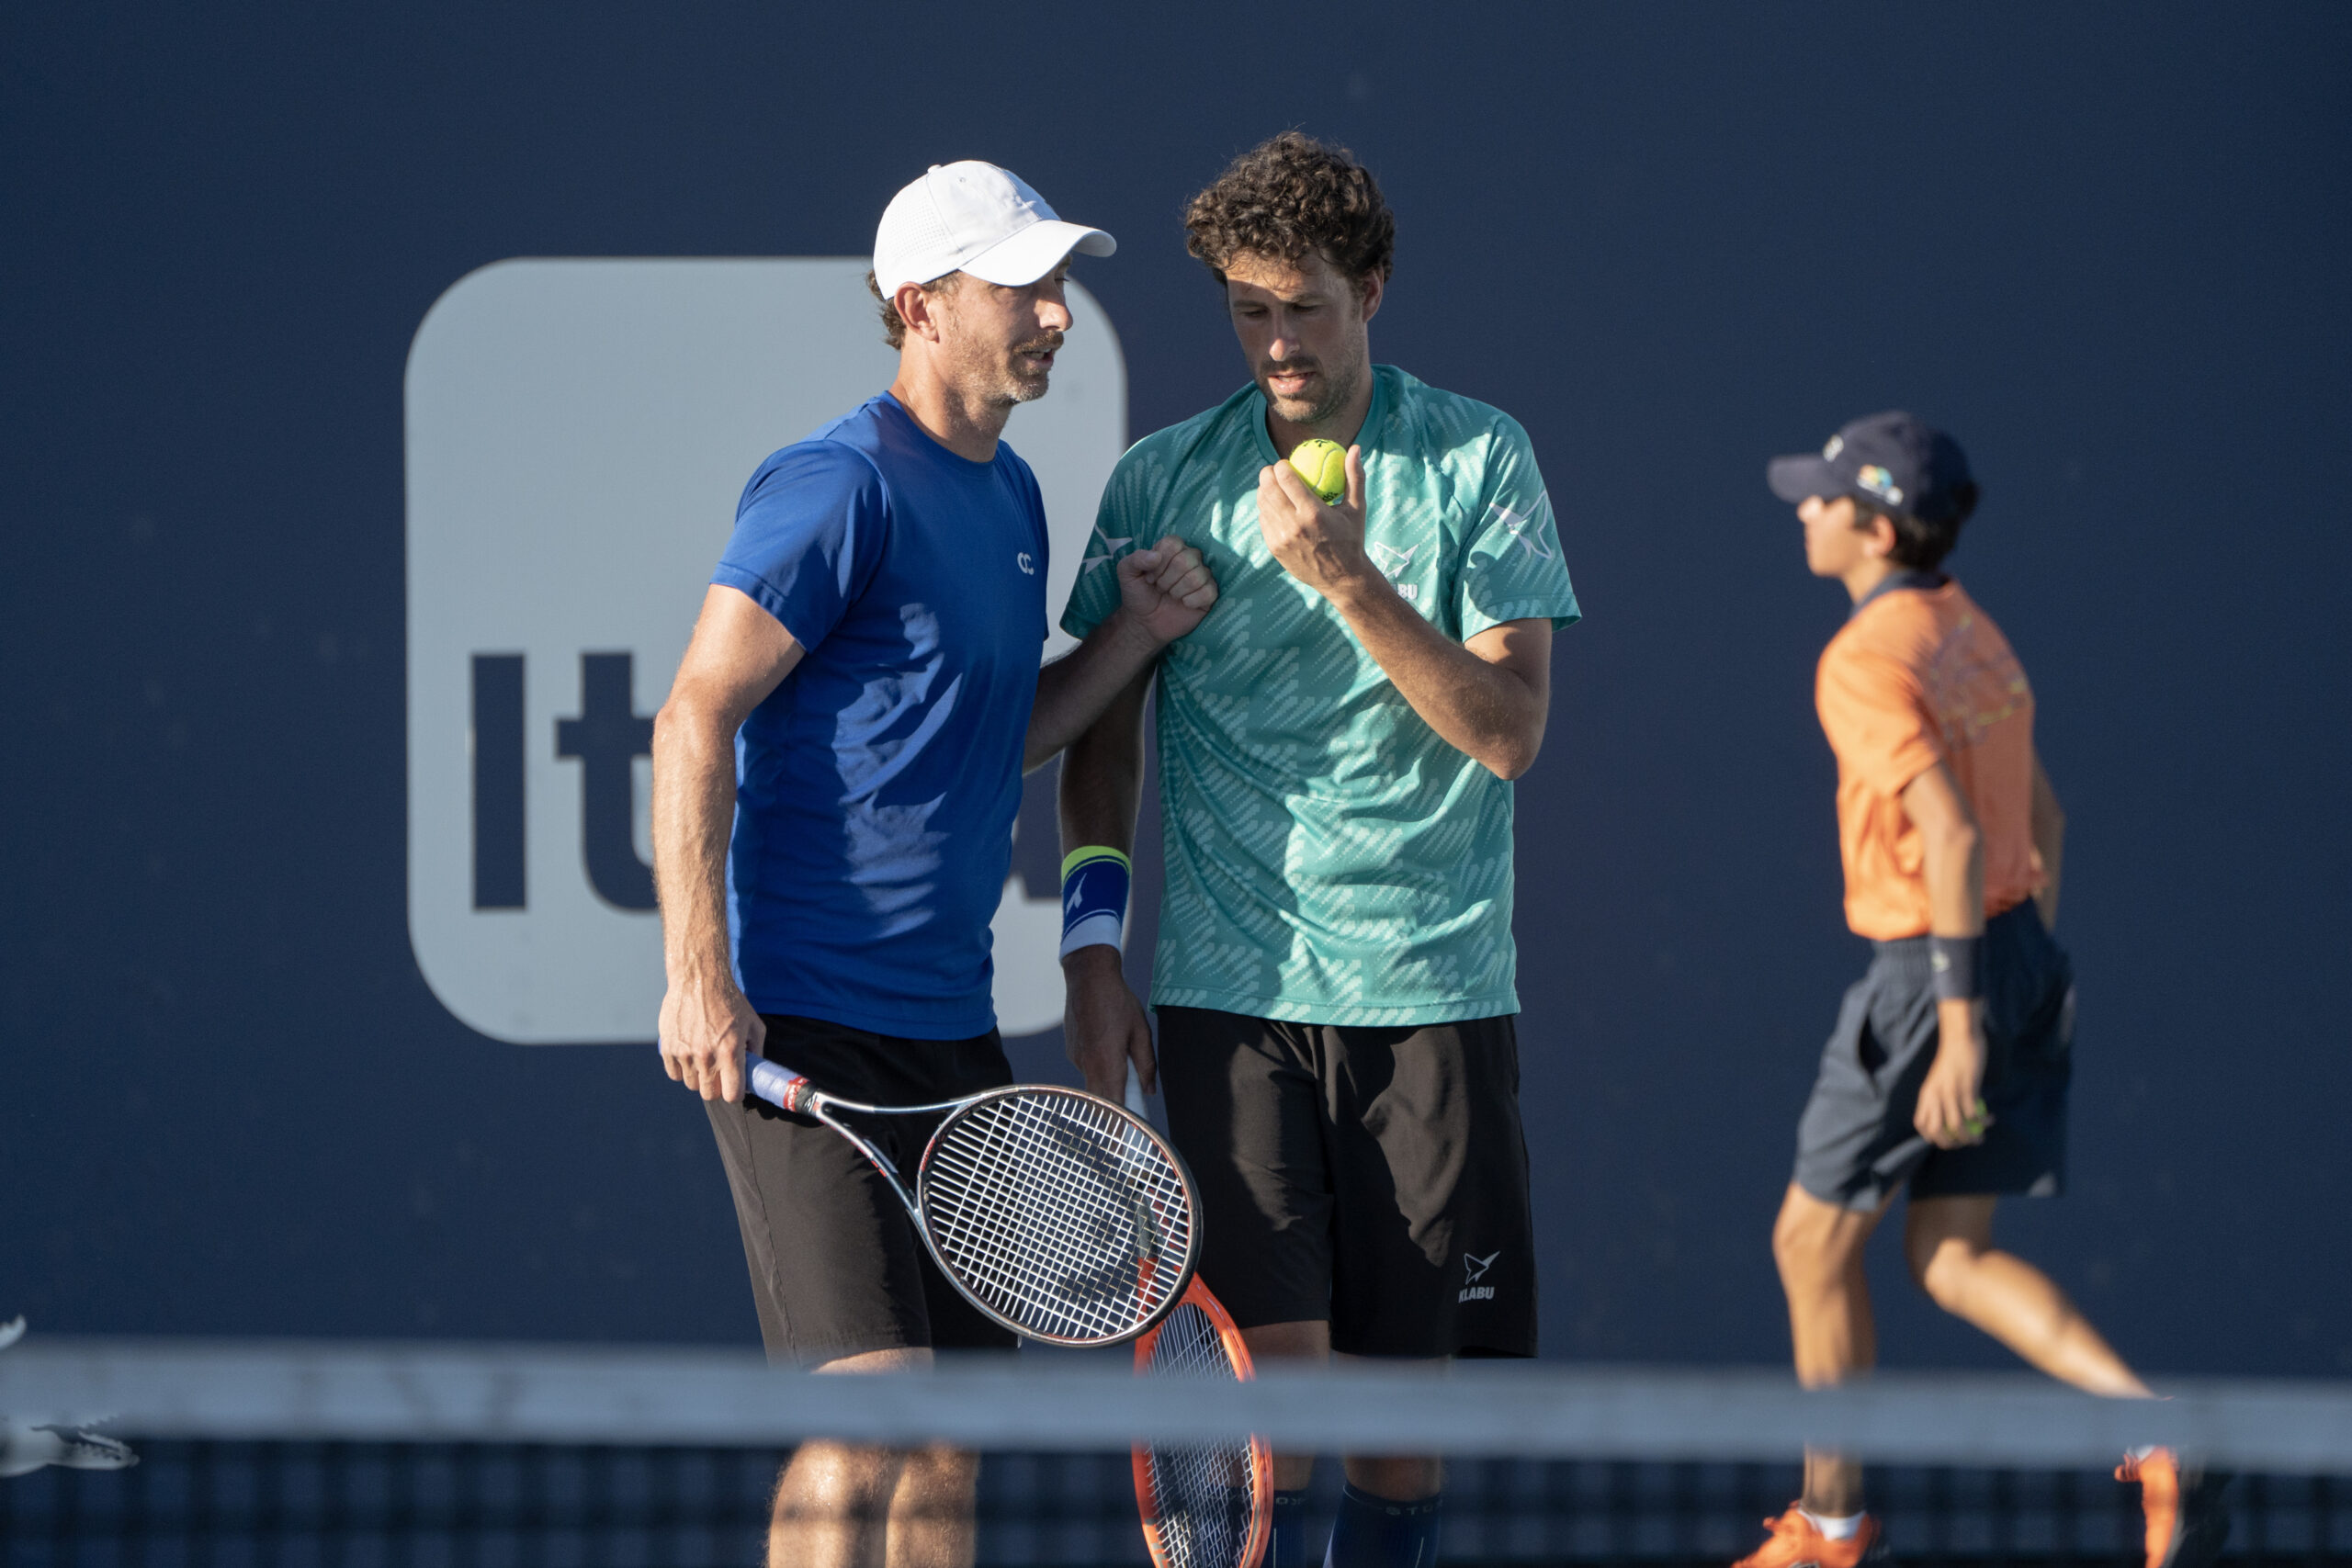 Matwe Middelkoop discusses strategy with partner Robin Haase at the 2023 Miami Open in Miami Gardens, Florida.